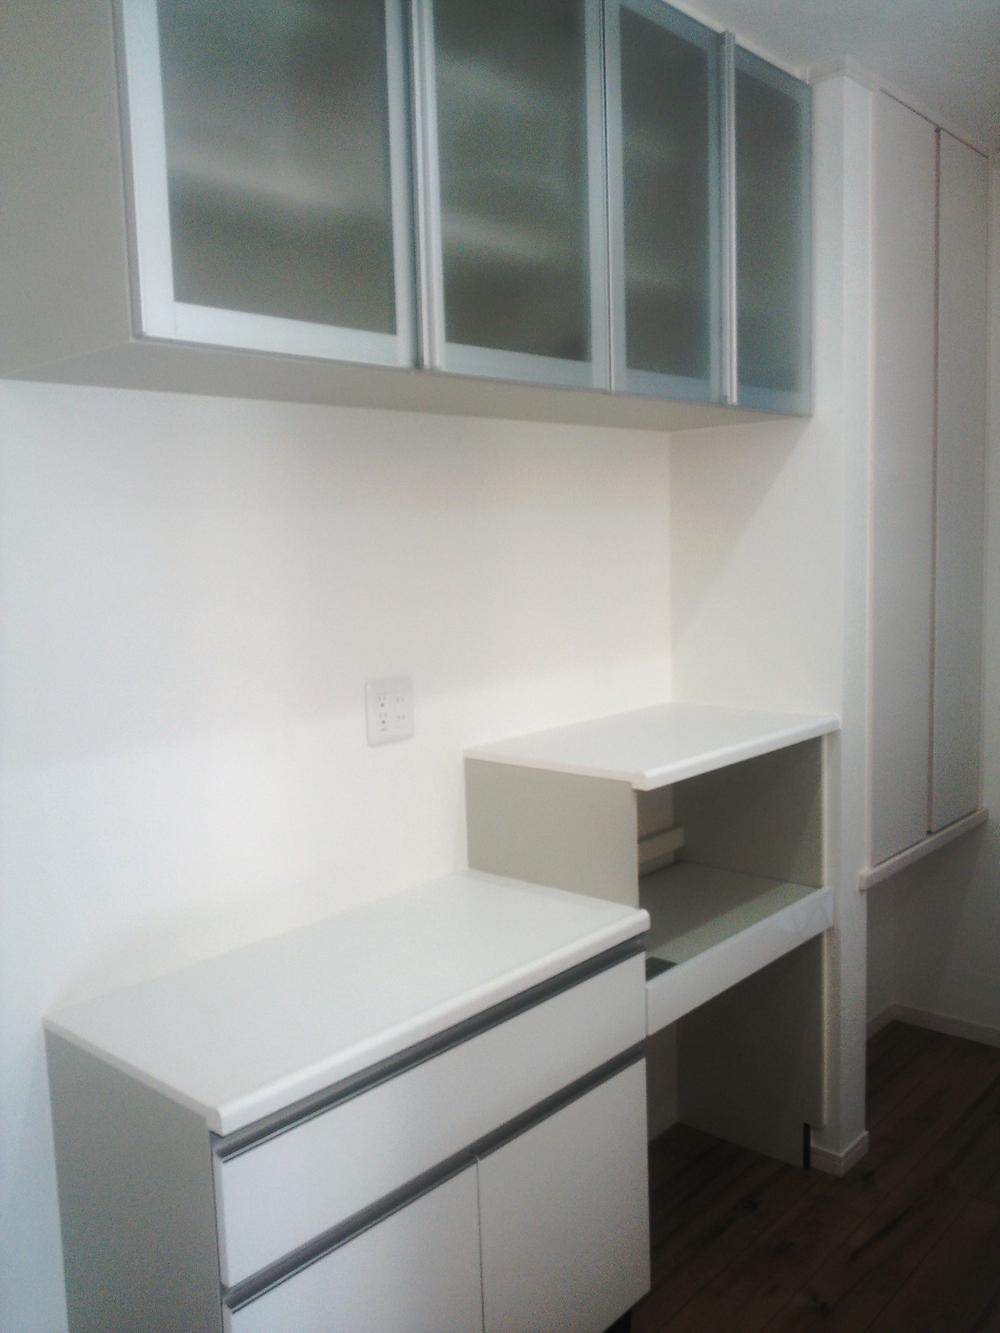 Kitchen. Convenient, Neat, Cup board is standard specification that get used to smile!